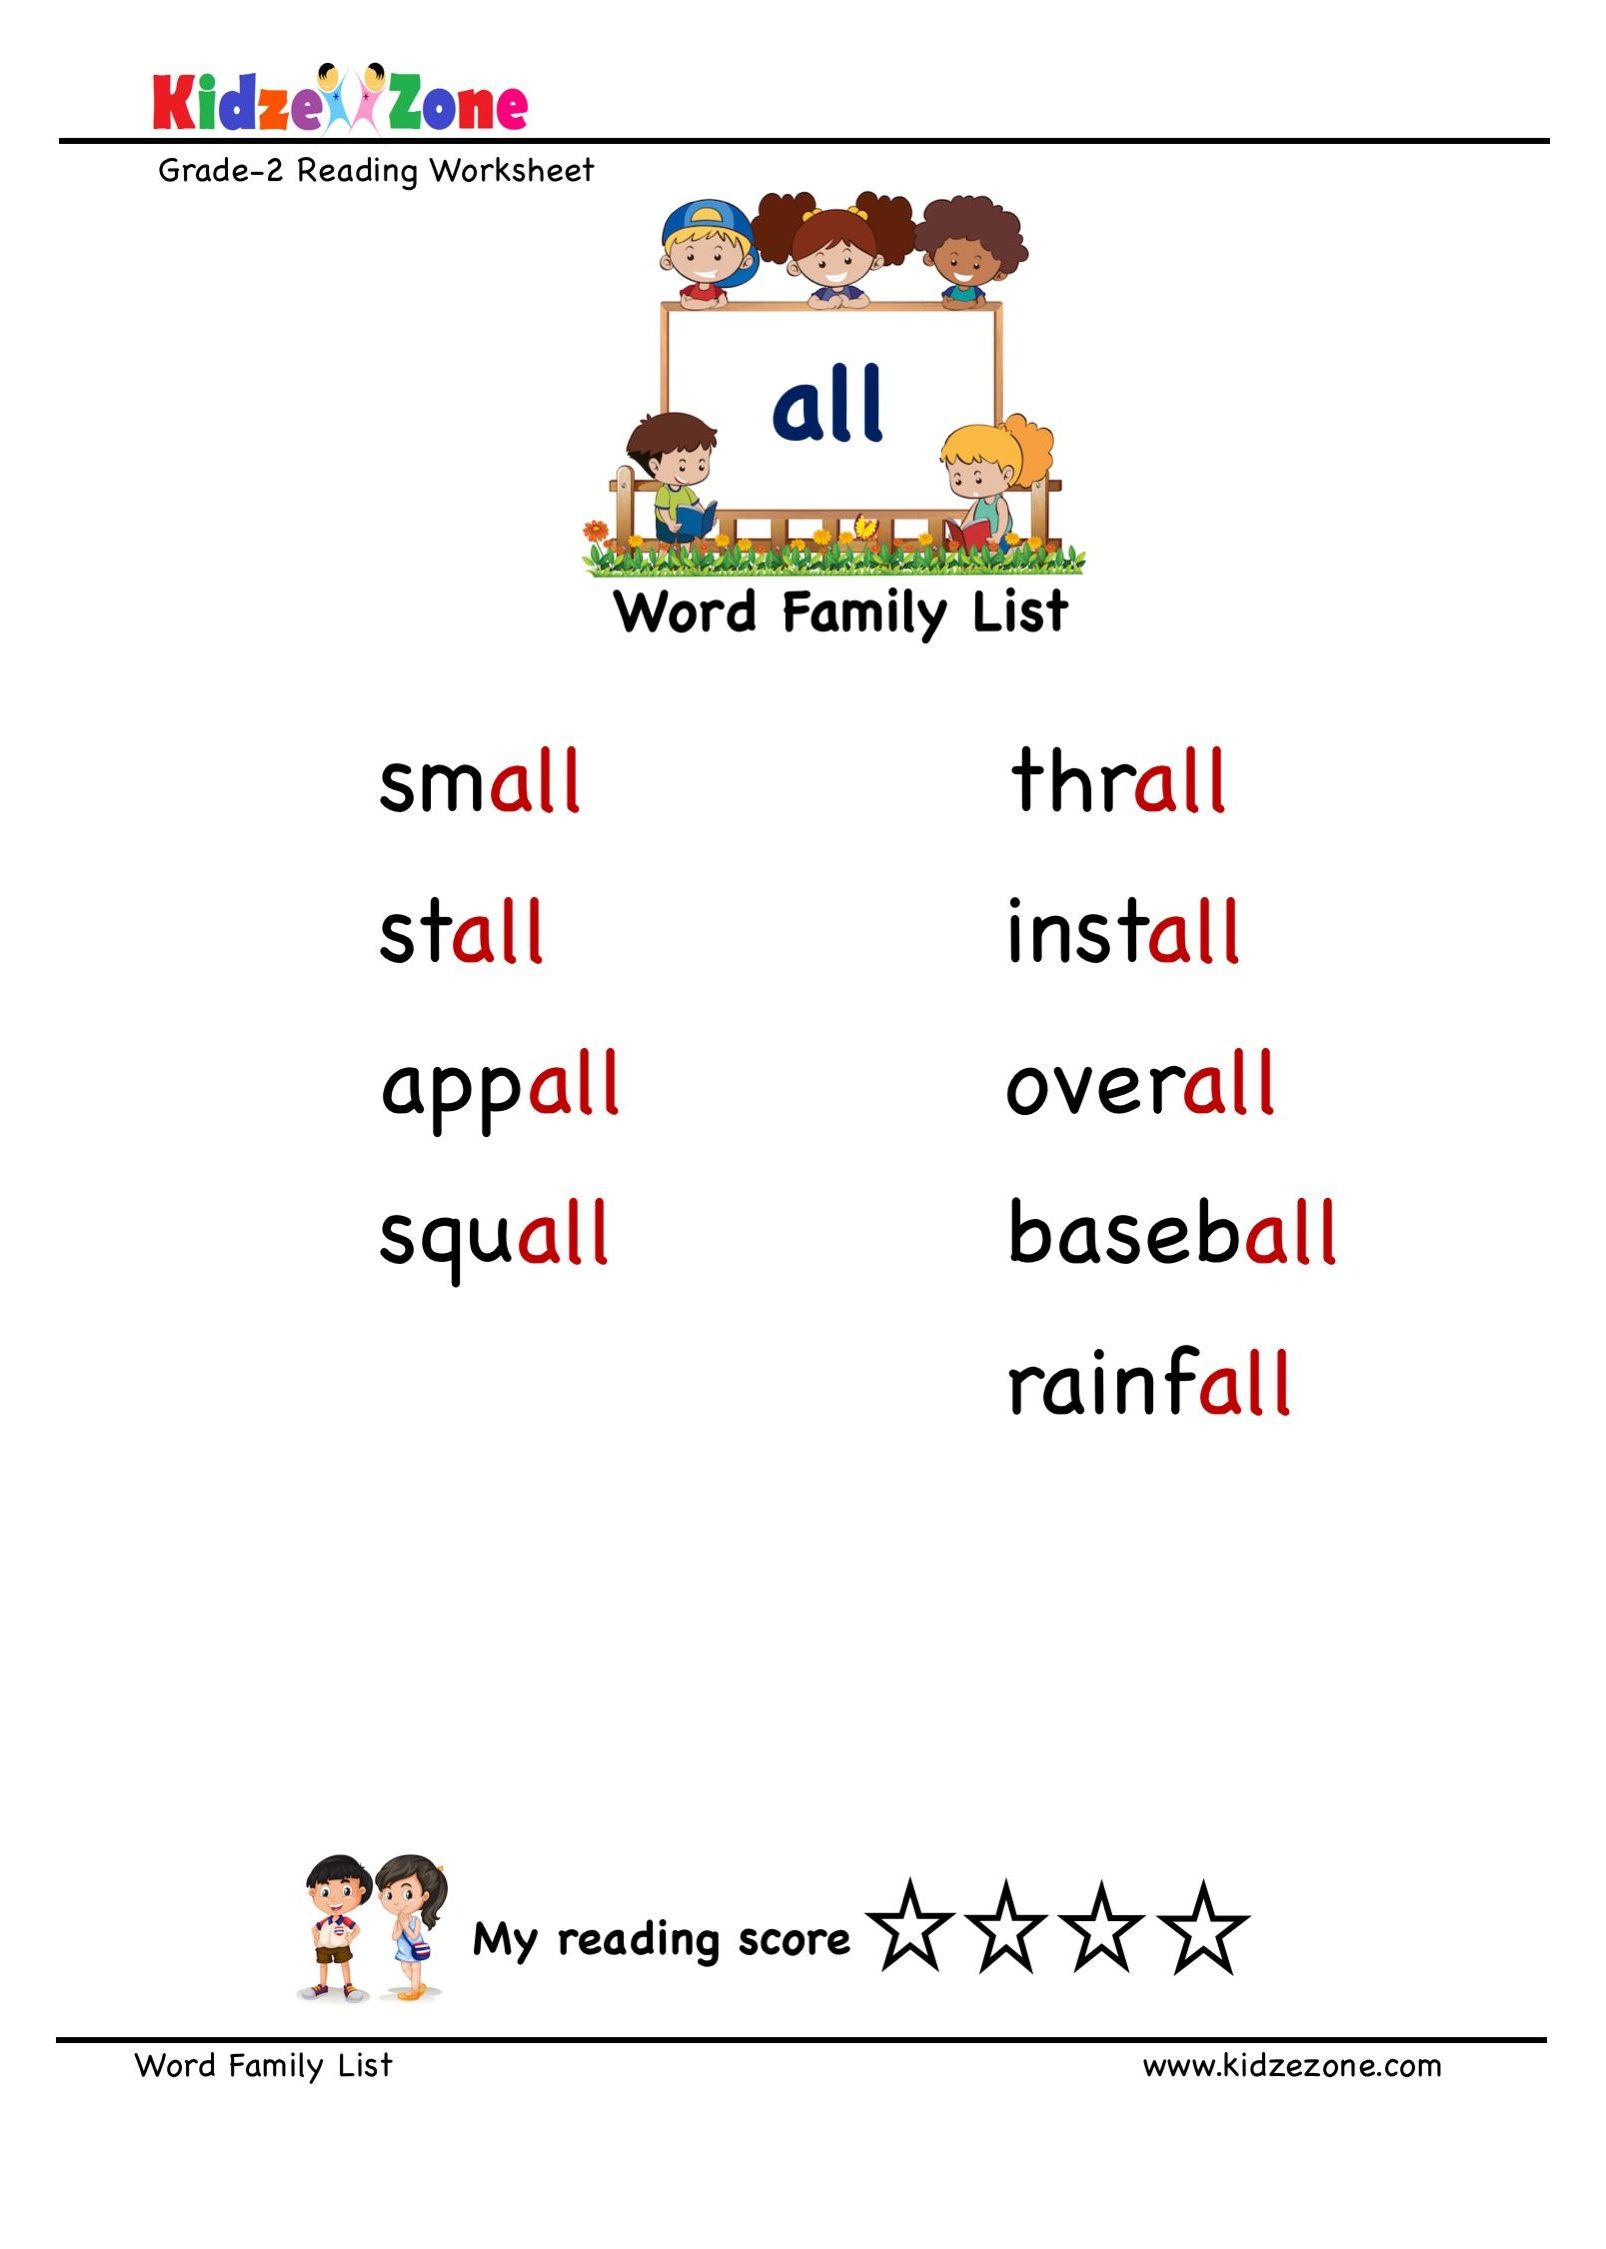 explore-and-learn-words-from-all-word-family-with-word-list-worksheet